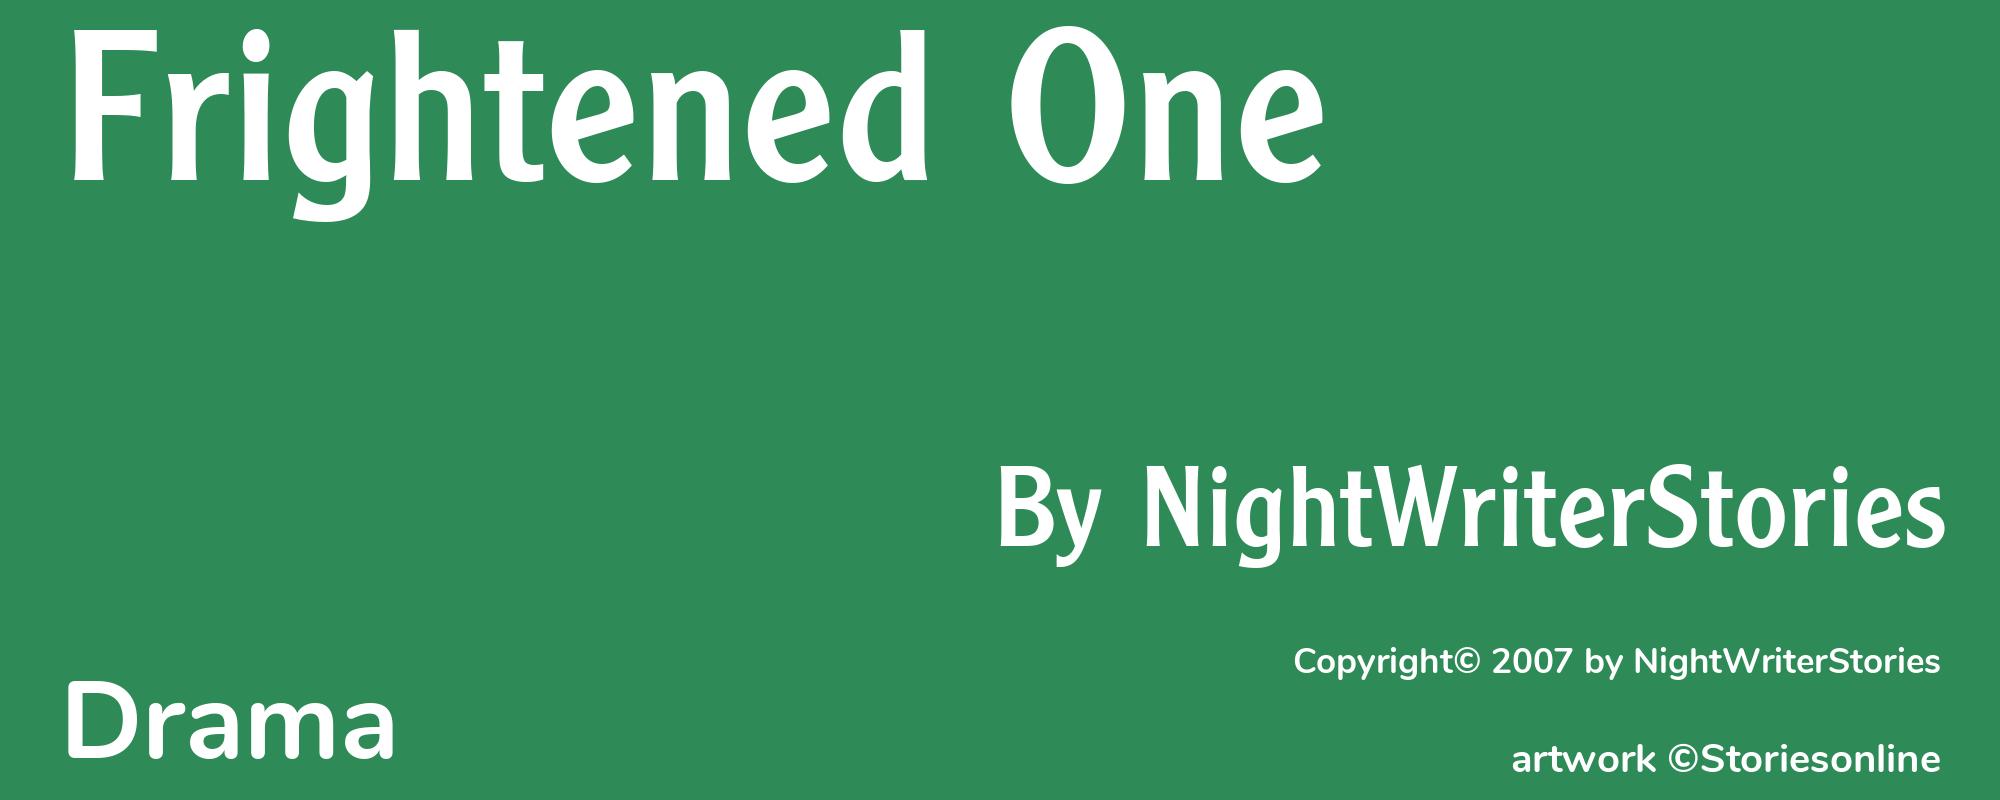 Frightened One - Cover